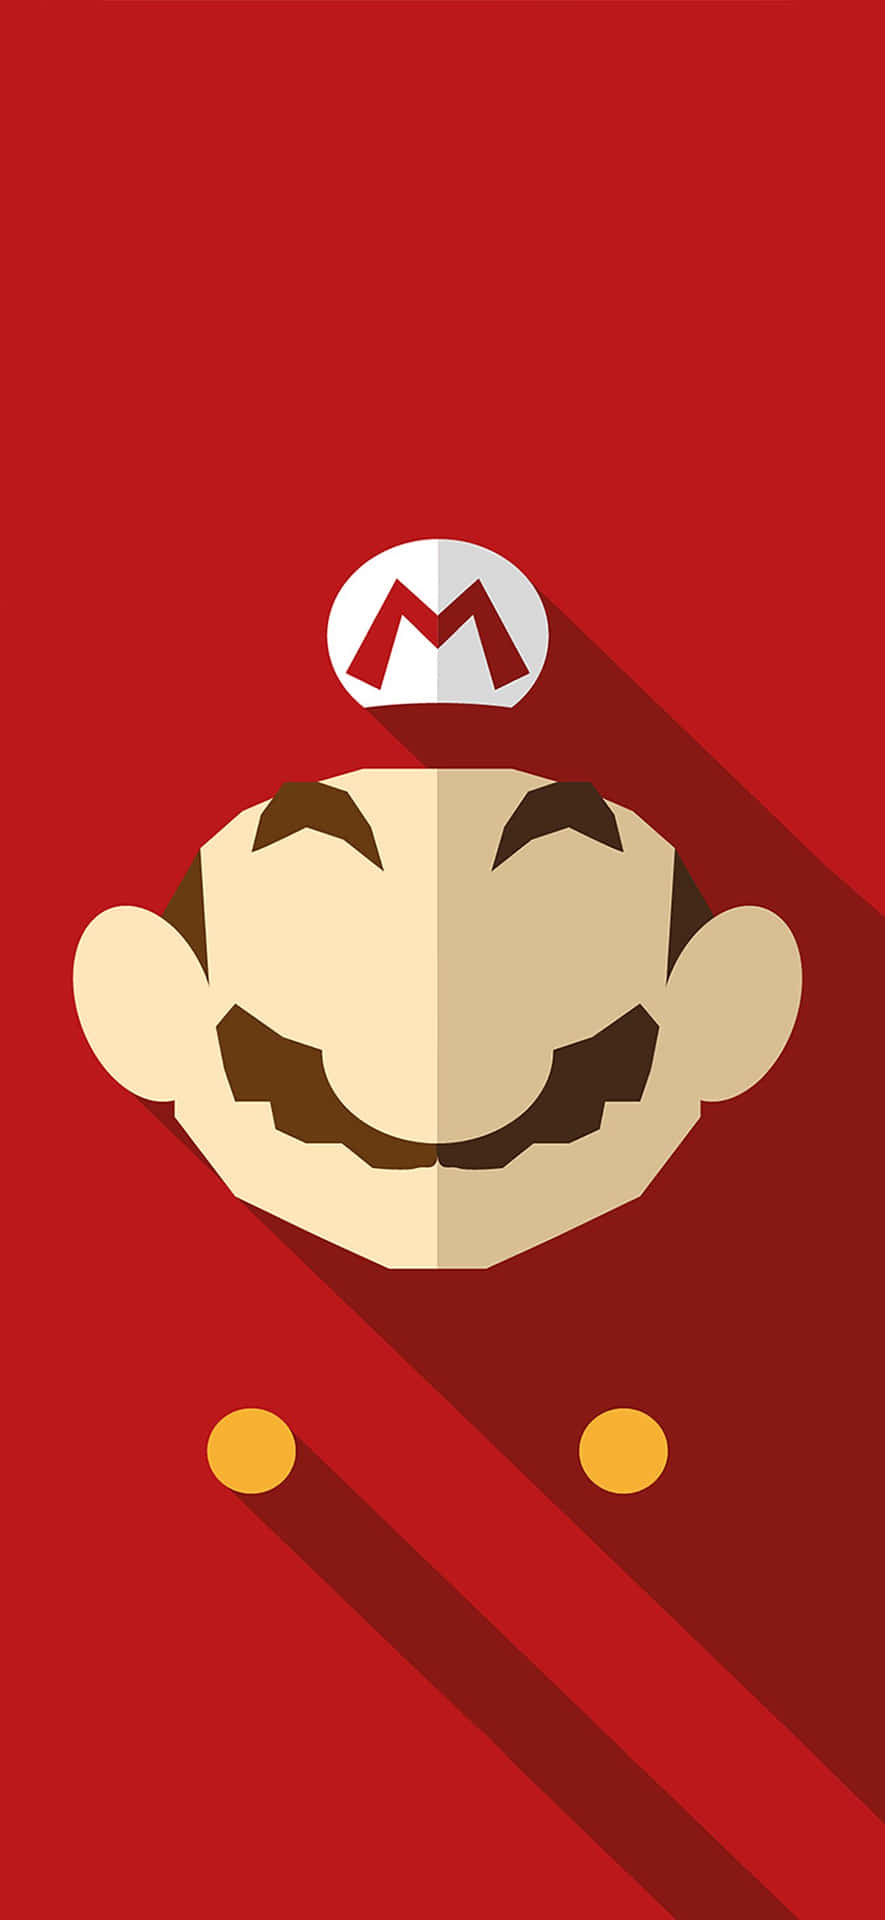 Unlock New Worlds With the Super Mario iPhone Wallpaper